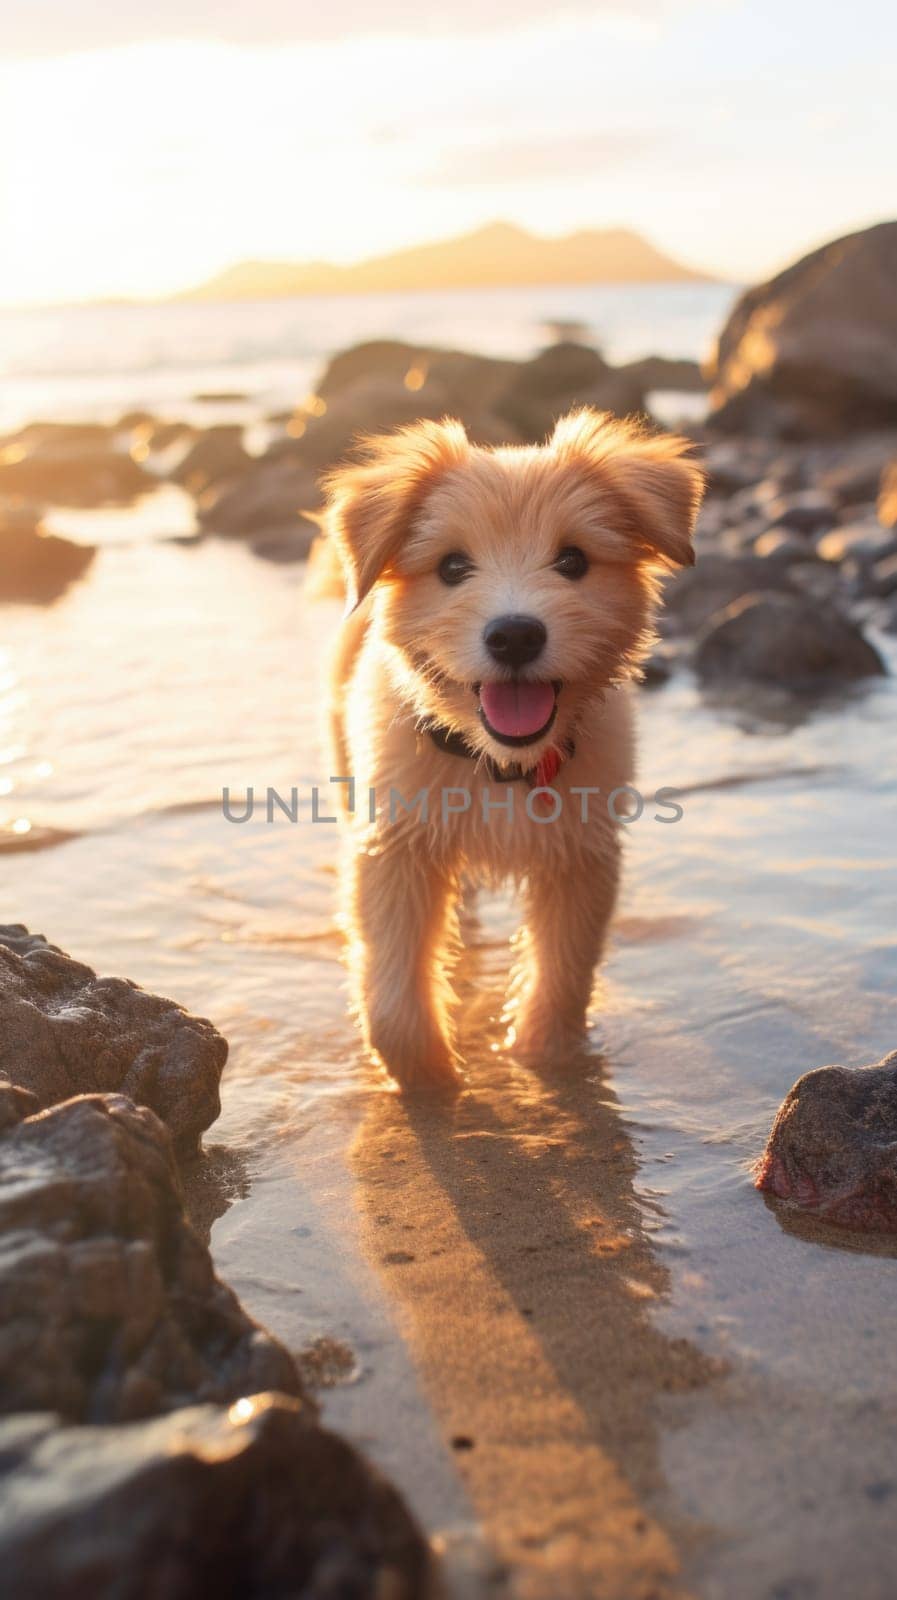 A small dog is walking on the beach at sunset